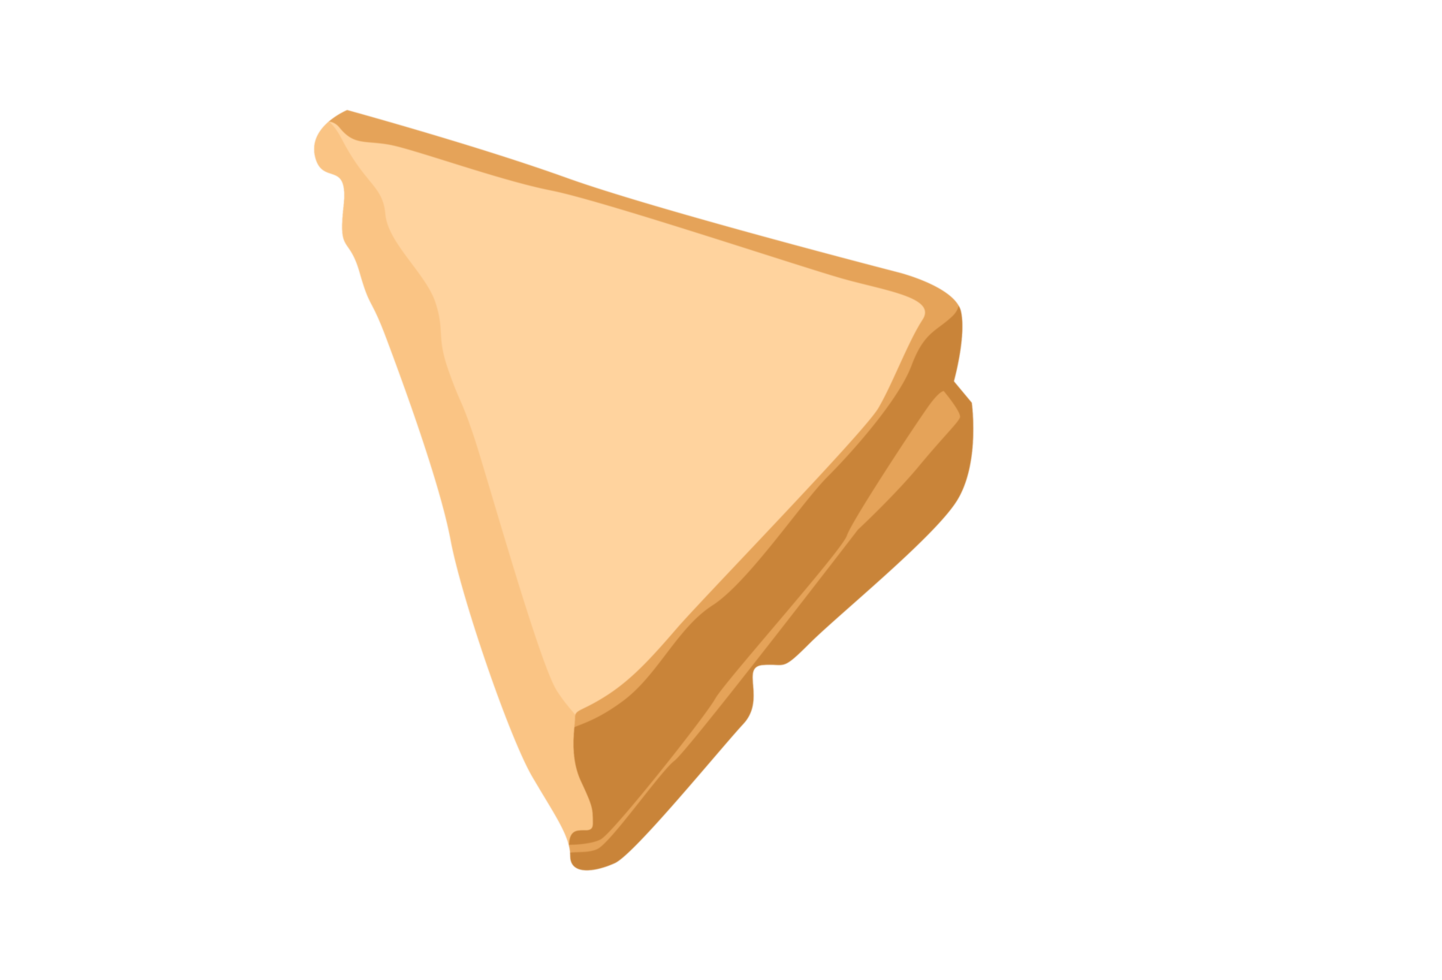 Illustration of a Triangular Slice of Bread png